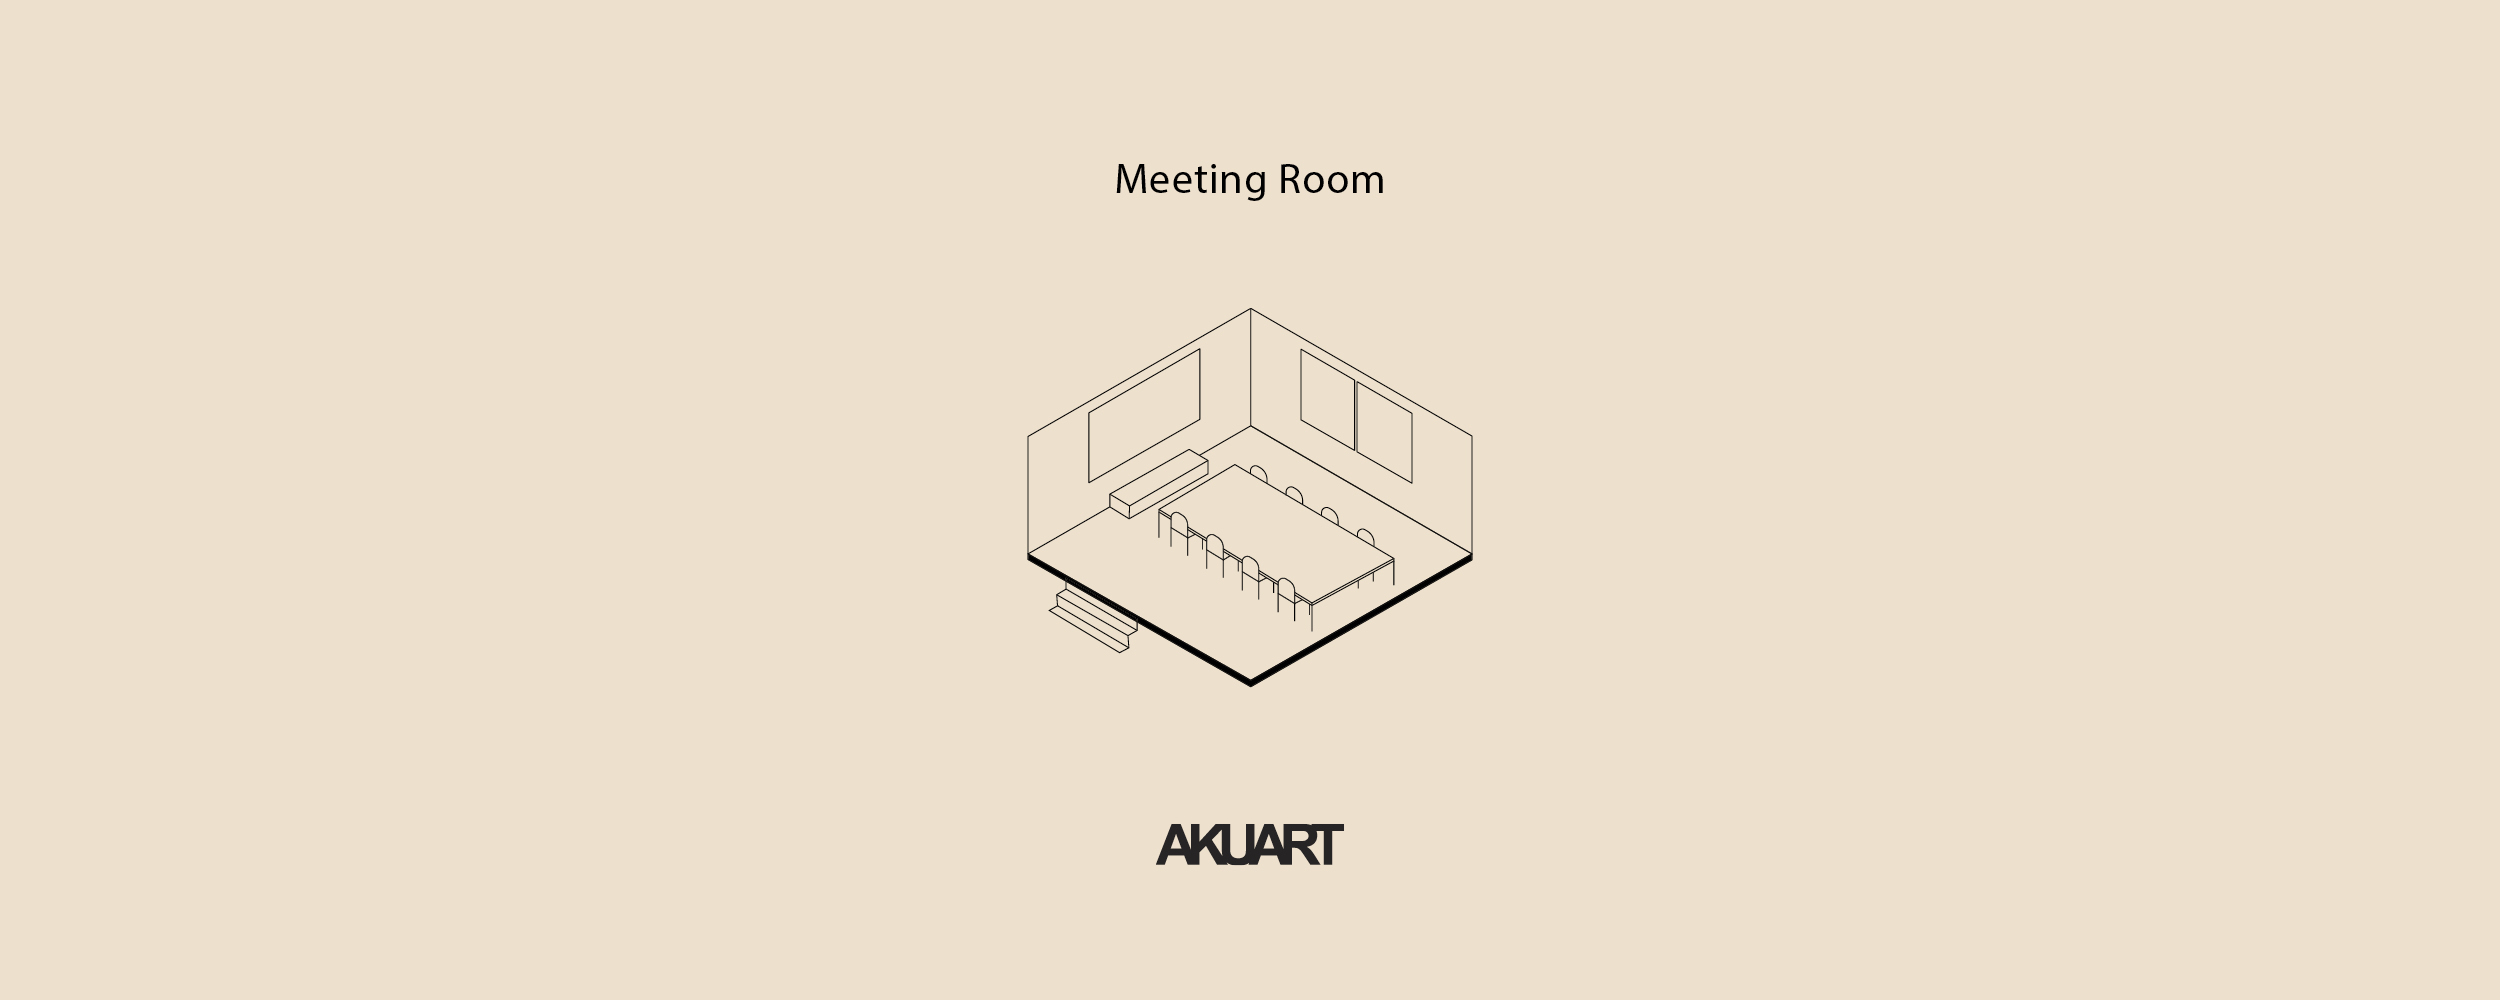 A guide to acoustics in meeting rooms